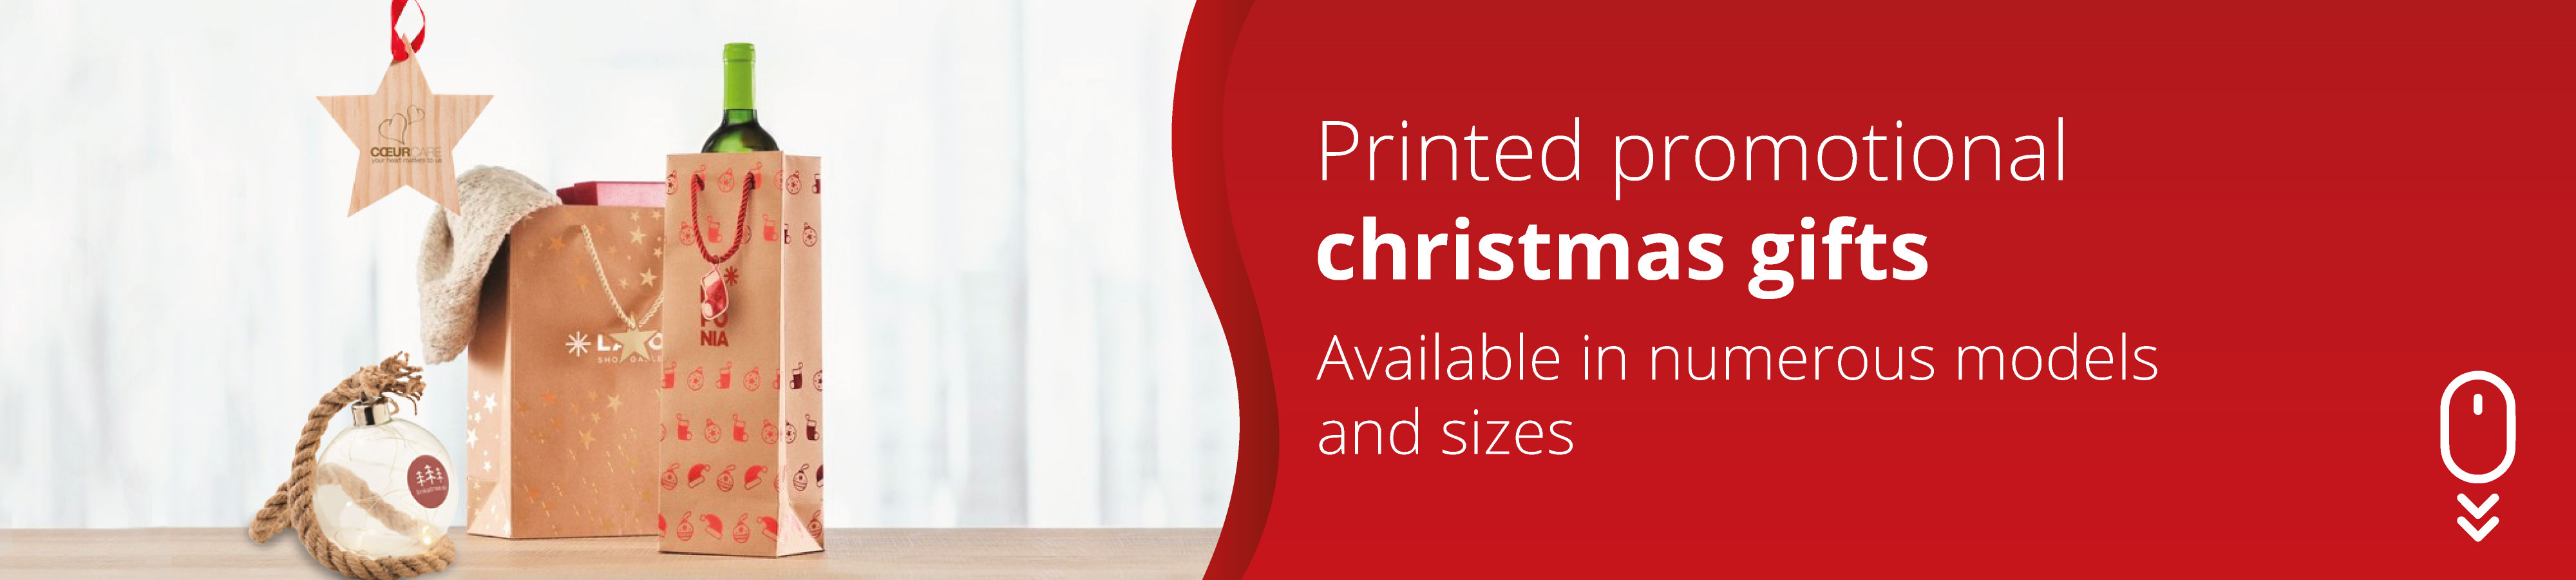 Printed-promotional-christmas-gifts